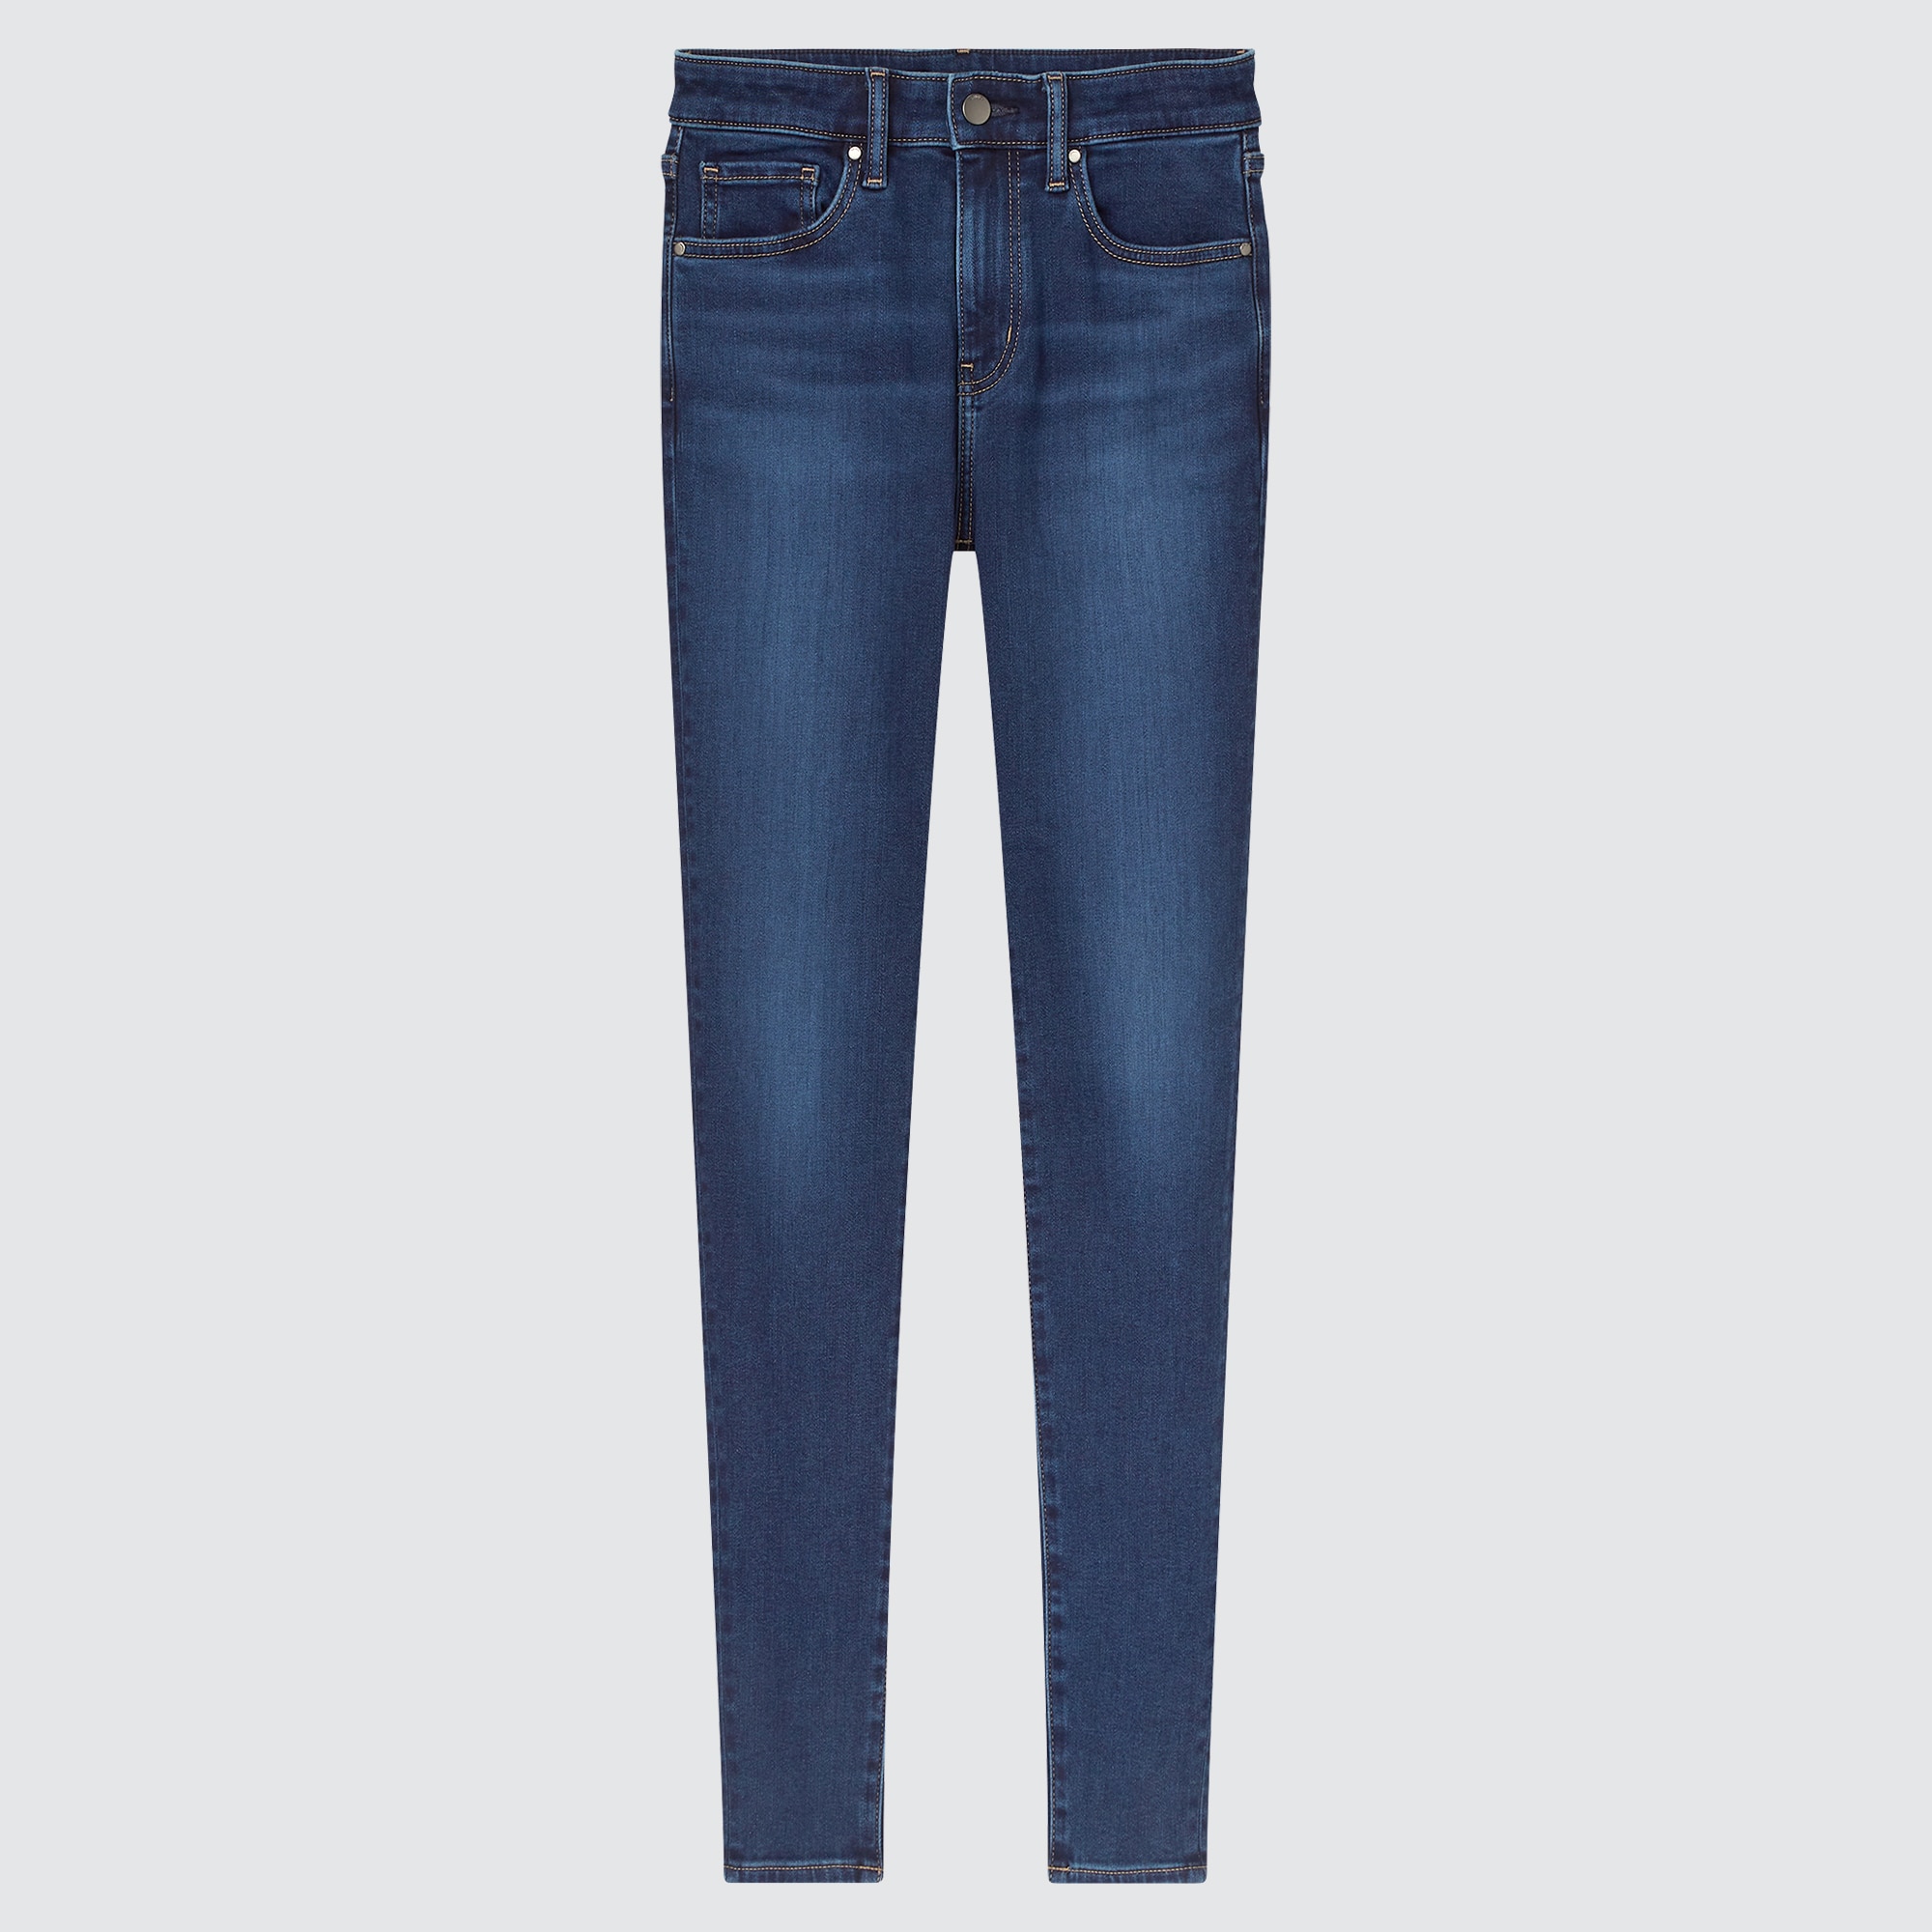 Uniqlo HeatTech Ultra Stretch Pants ( Jeans material) - $5